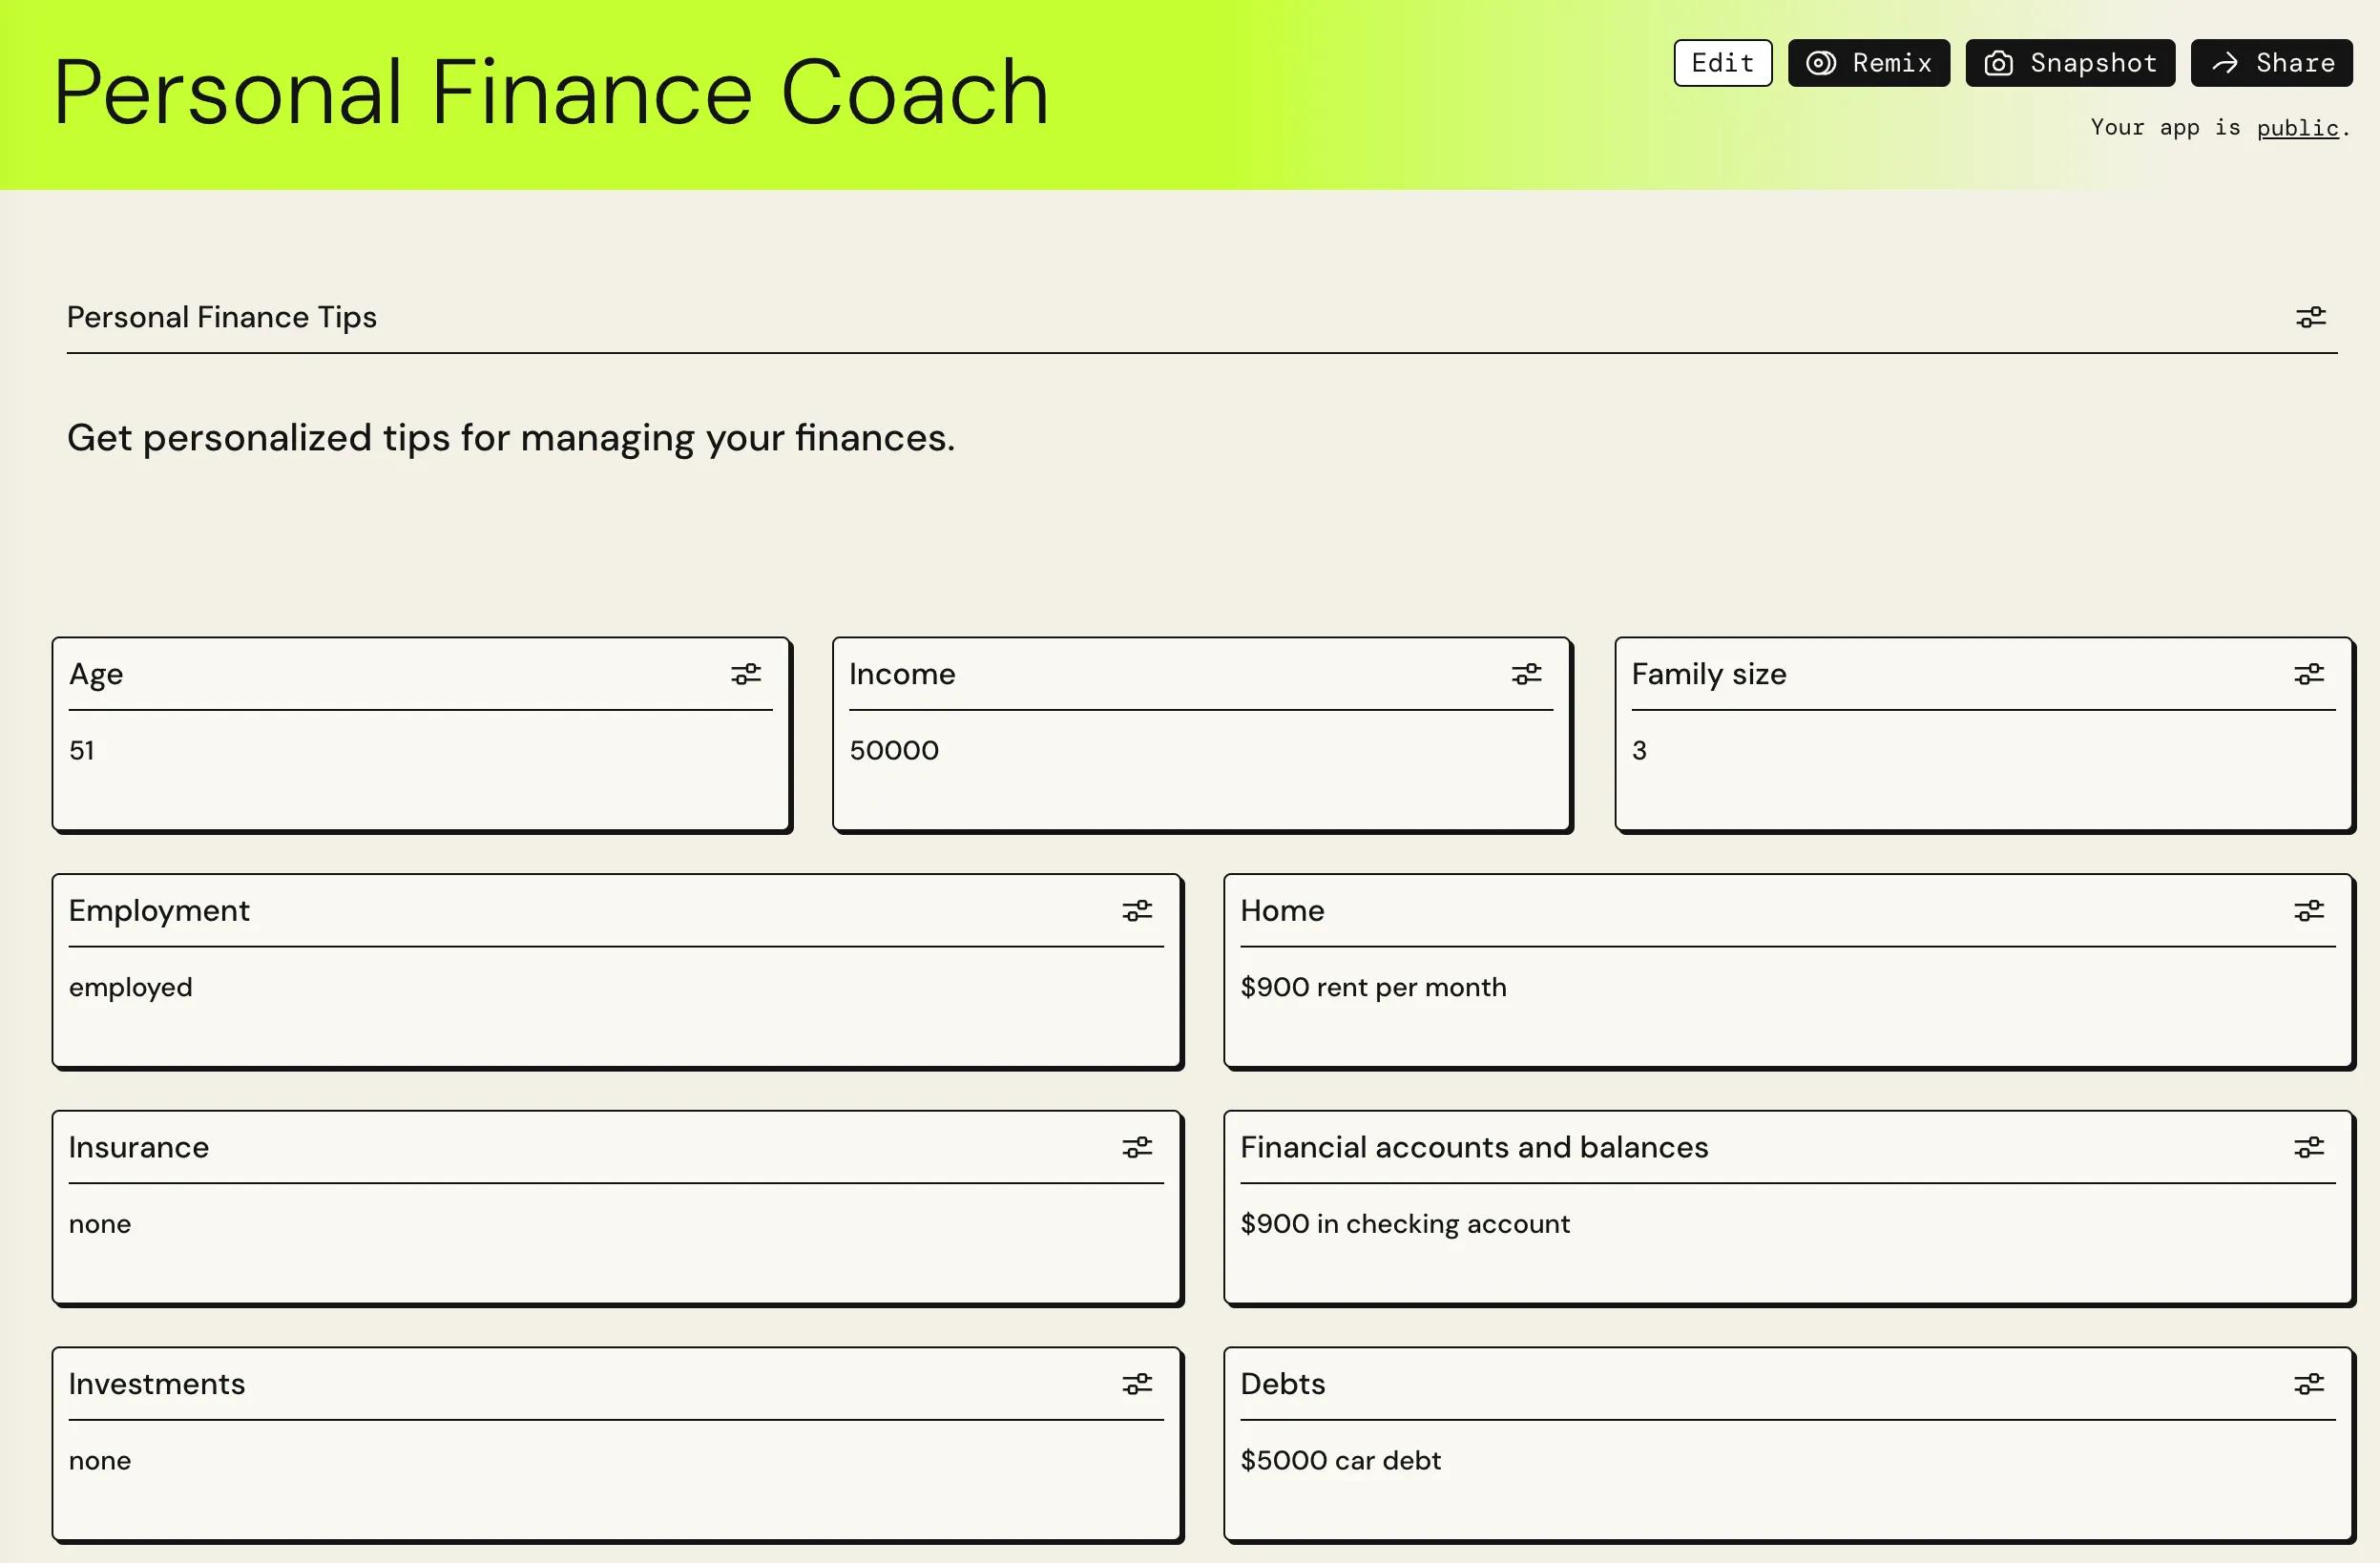 Creating a personal finance coach using PartyRock